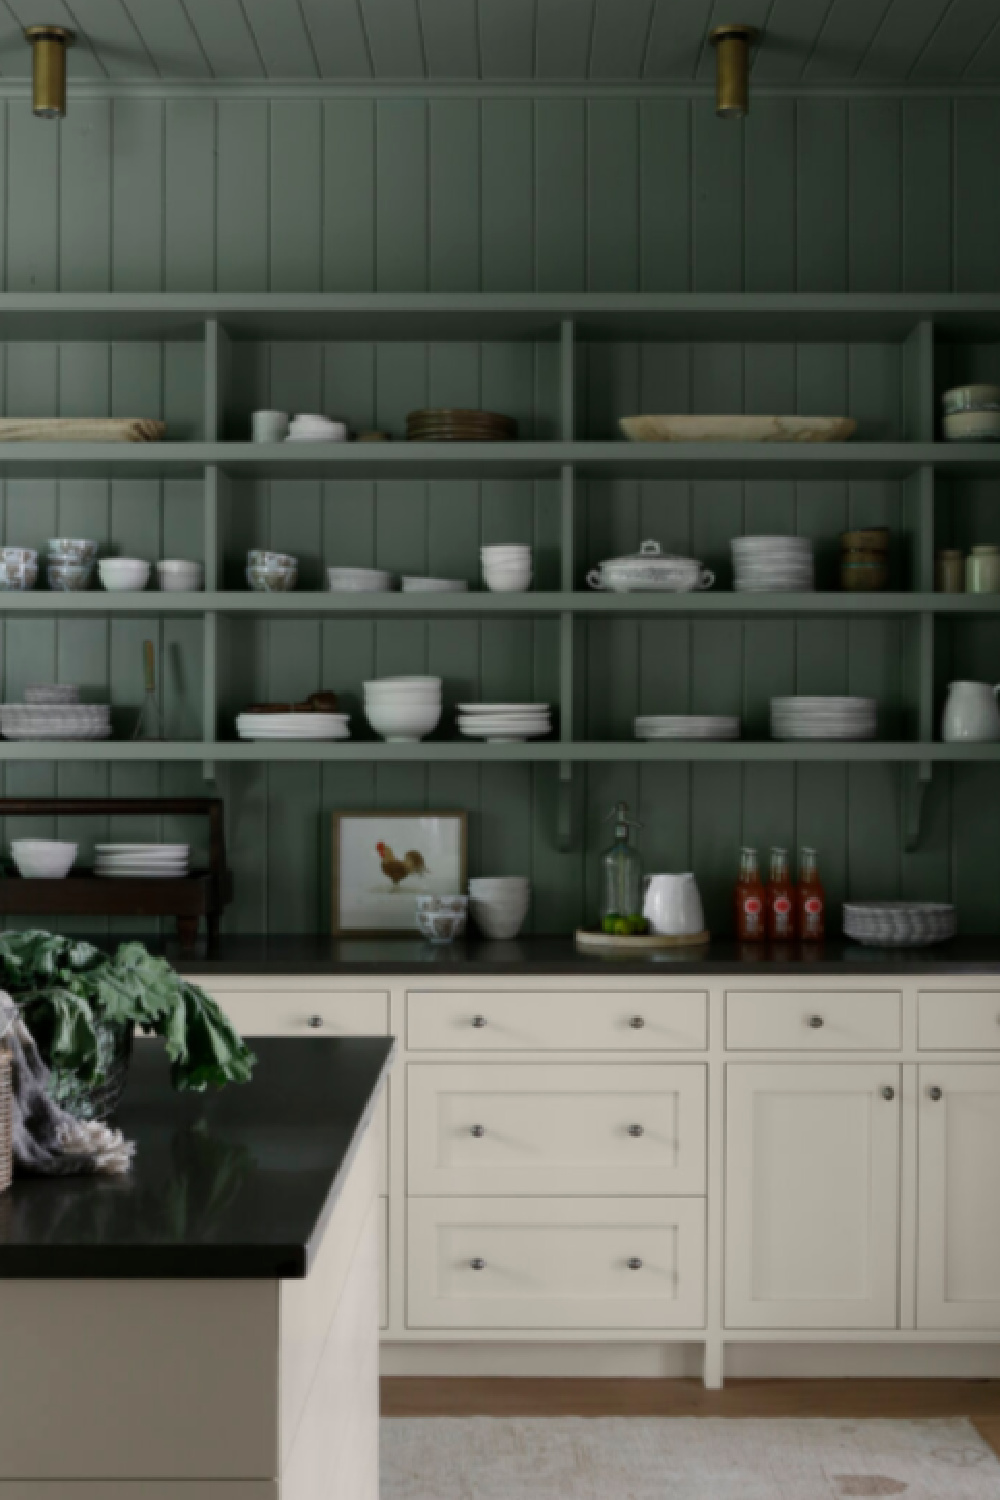 April Tomlinson designed kitchen (Southern Charm) with SW Acacia Haze green paint color. #acaciahaze #greenkitchens